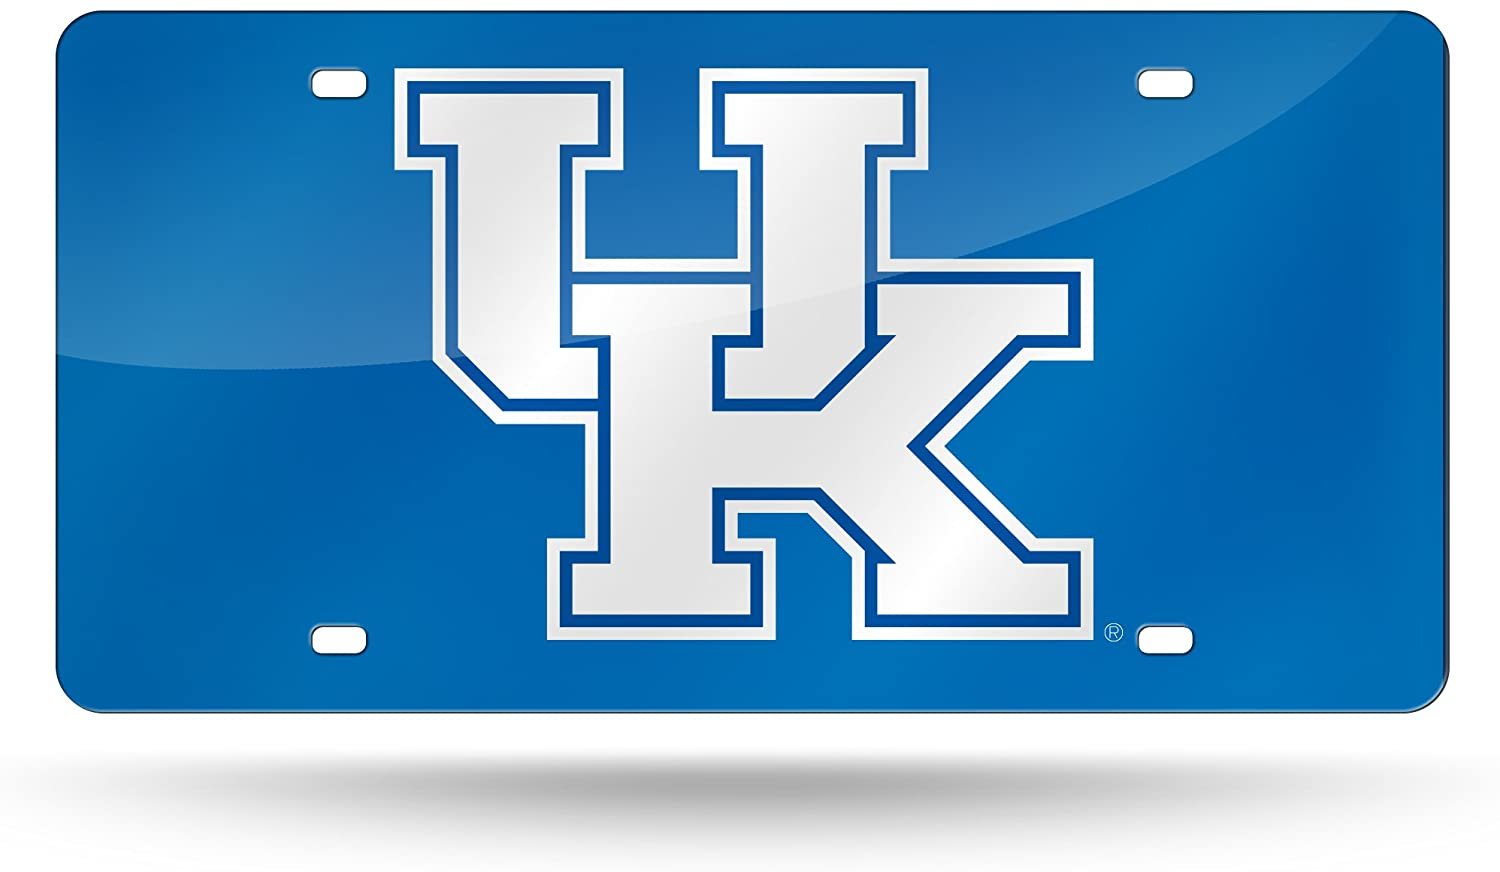 University of Kentucky Wildcats Premium Laser Cut Tag License Plate, Blue, Mirrored Acrylic Inlaid, 12x6 Inch